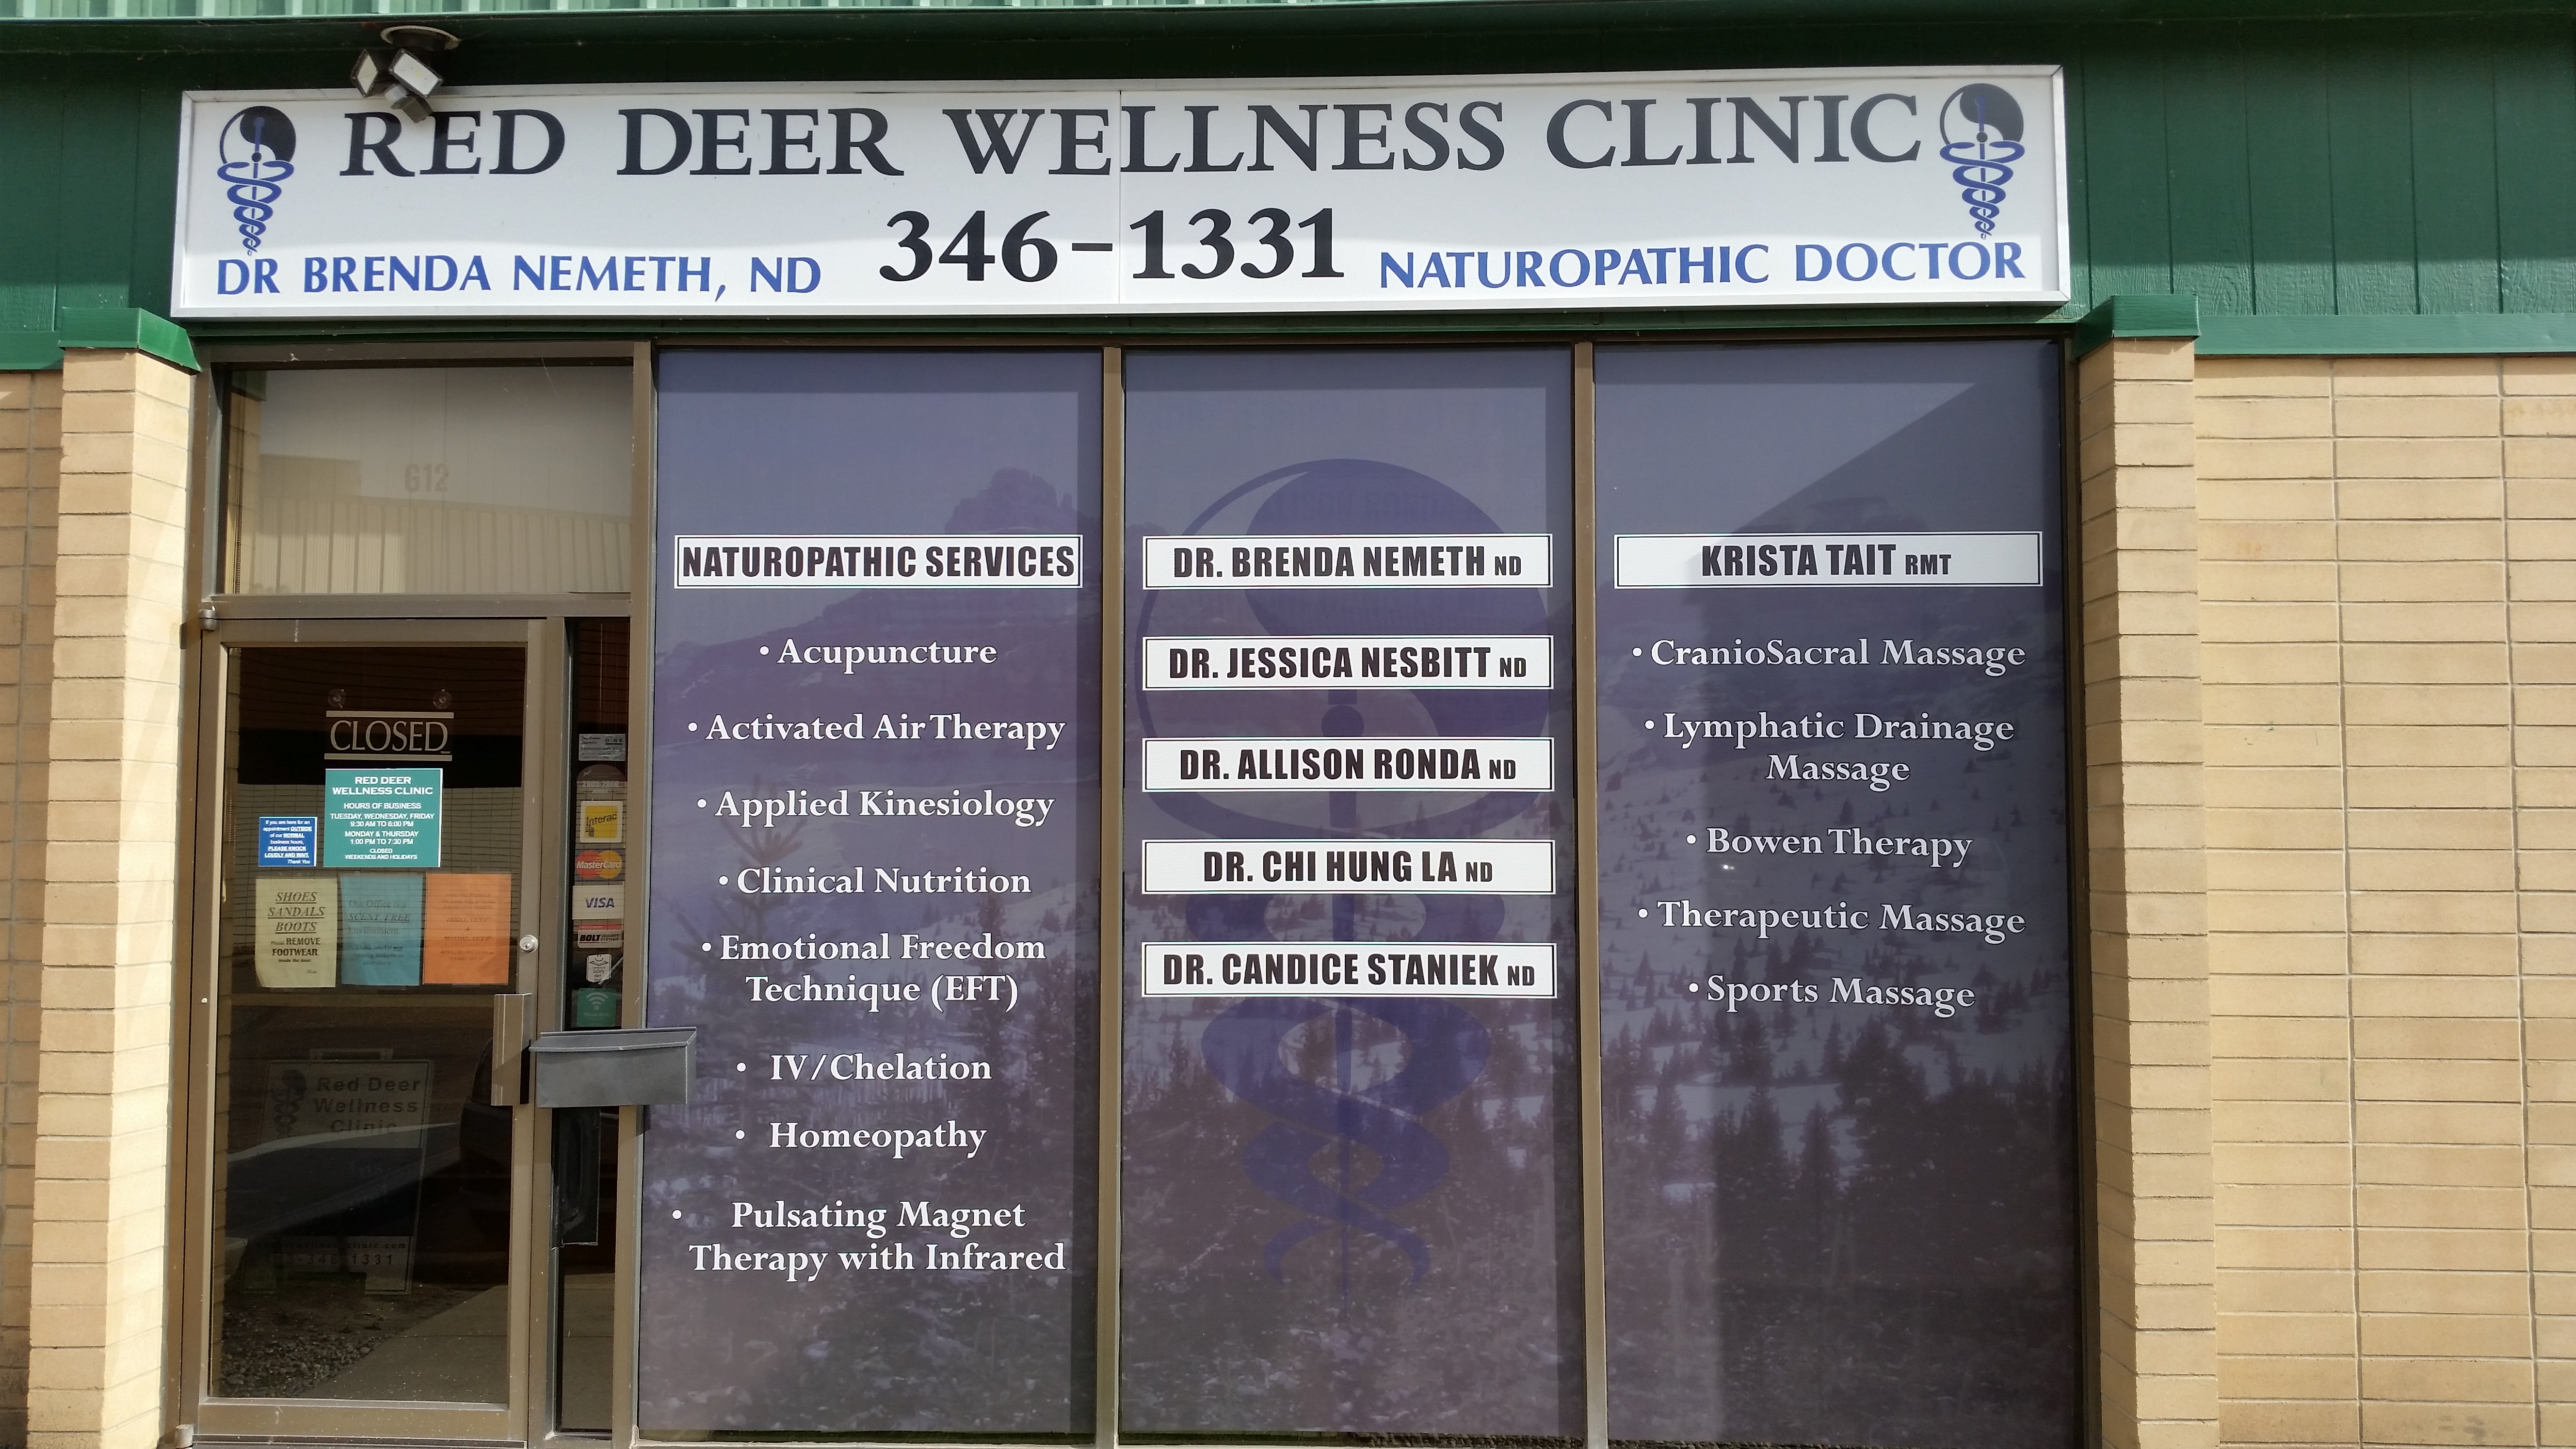 Red Deer Wellness Clinic - Naturopathic Doctor Directory